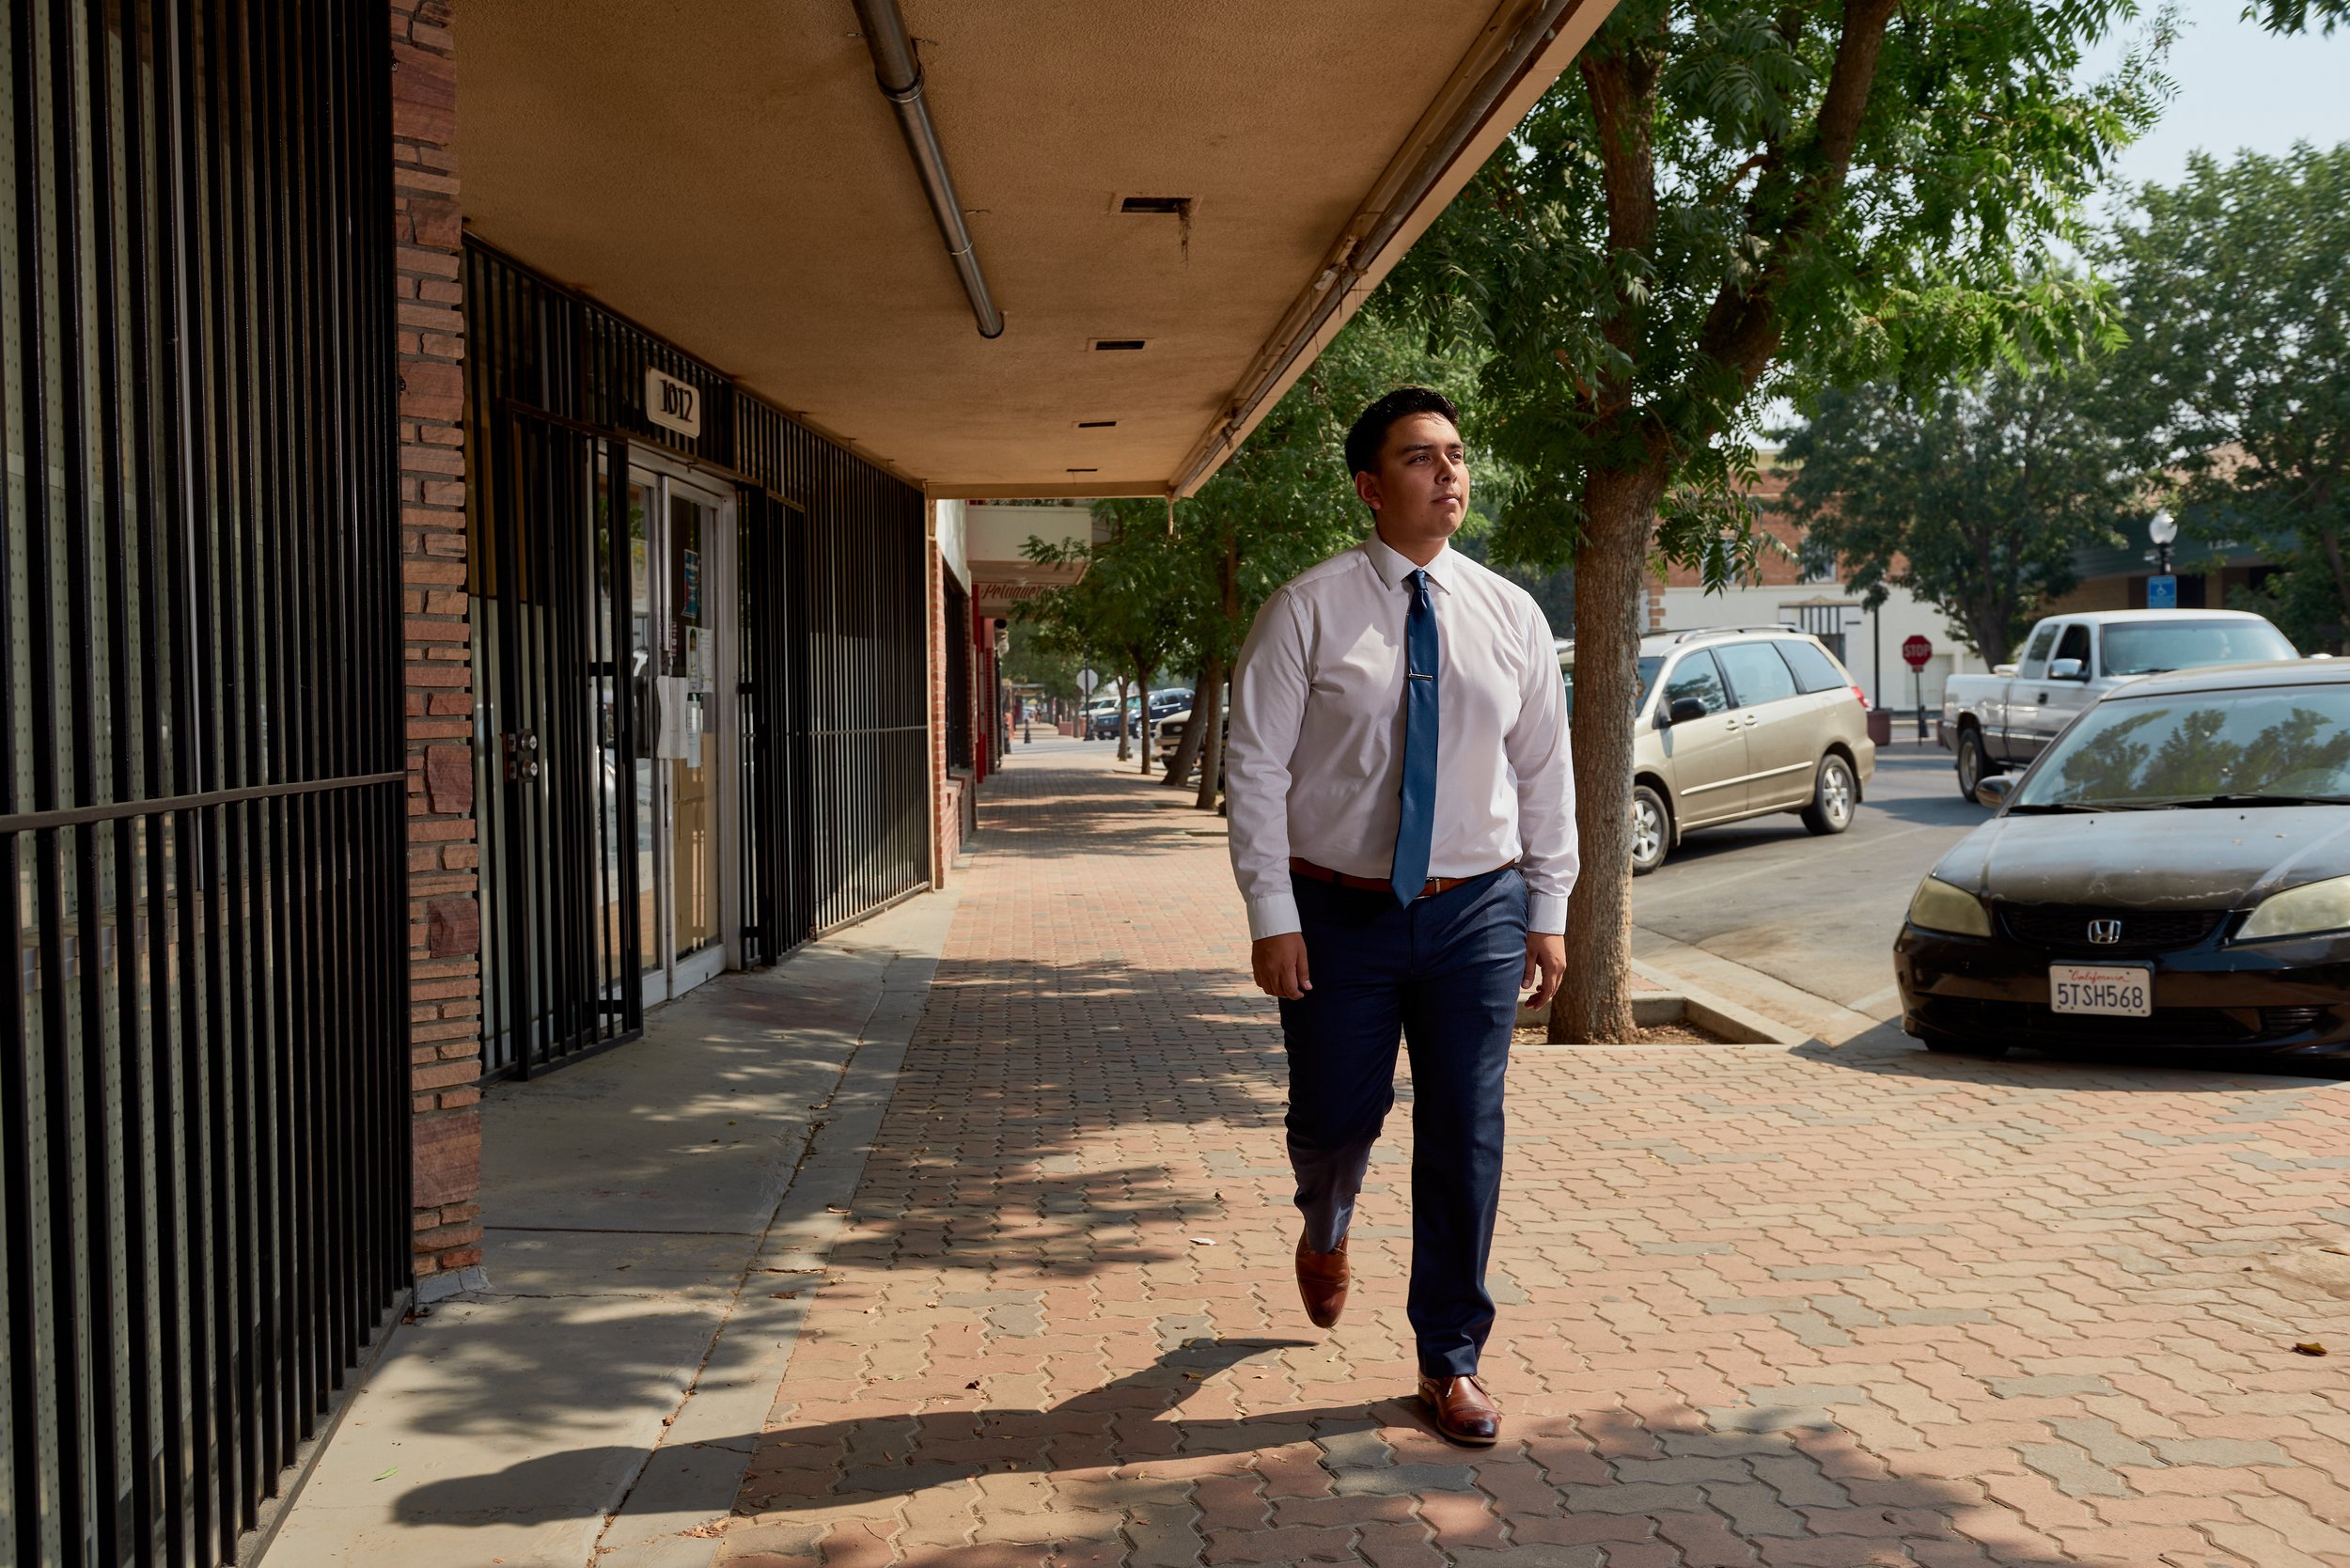 Bryan Osorio, the 25-year-old mayor of Delano, is also challenging Valadao